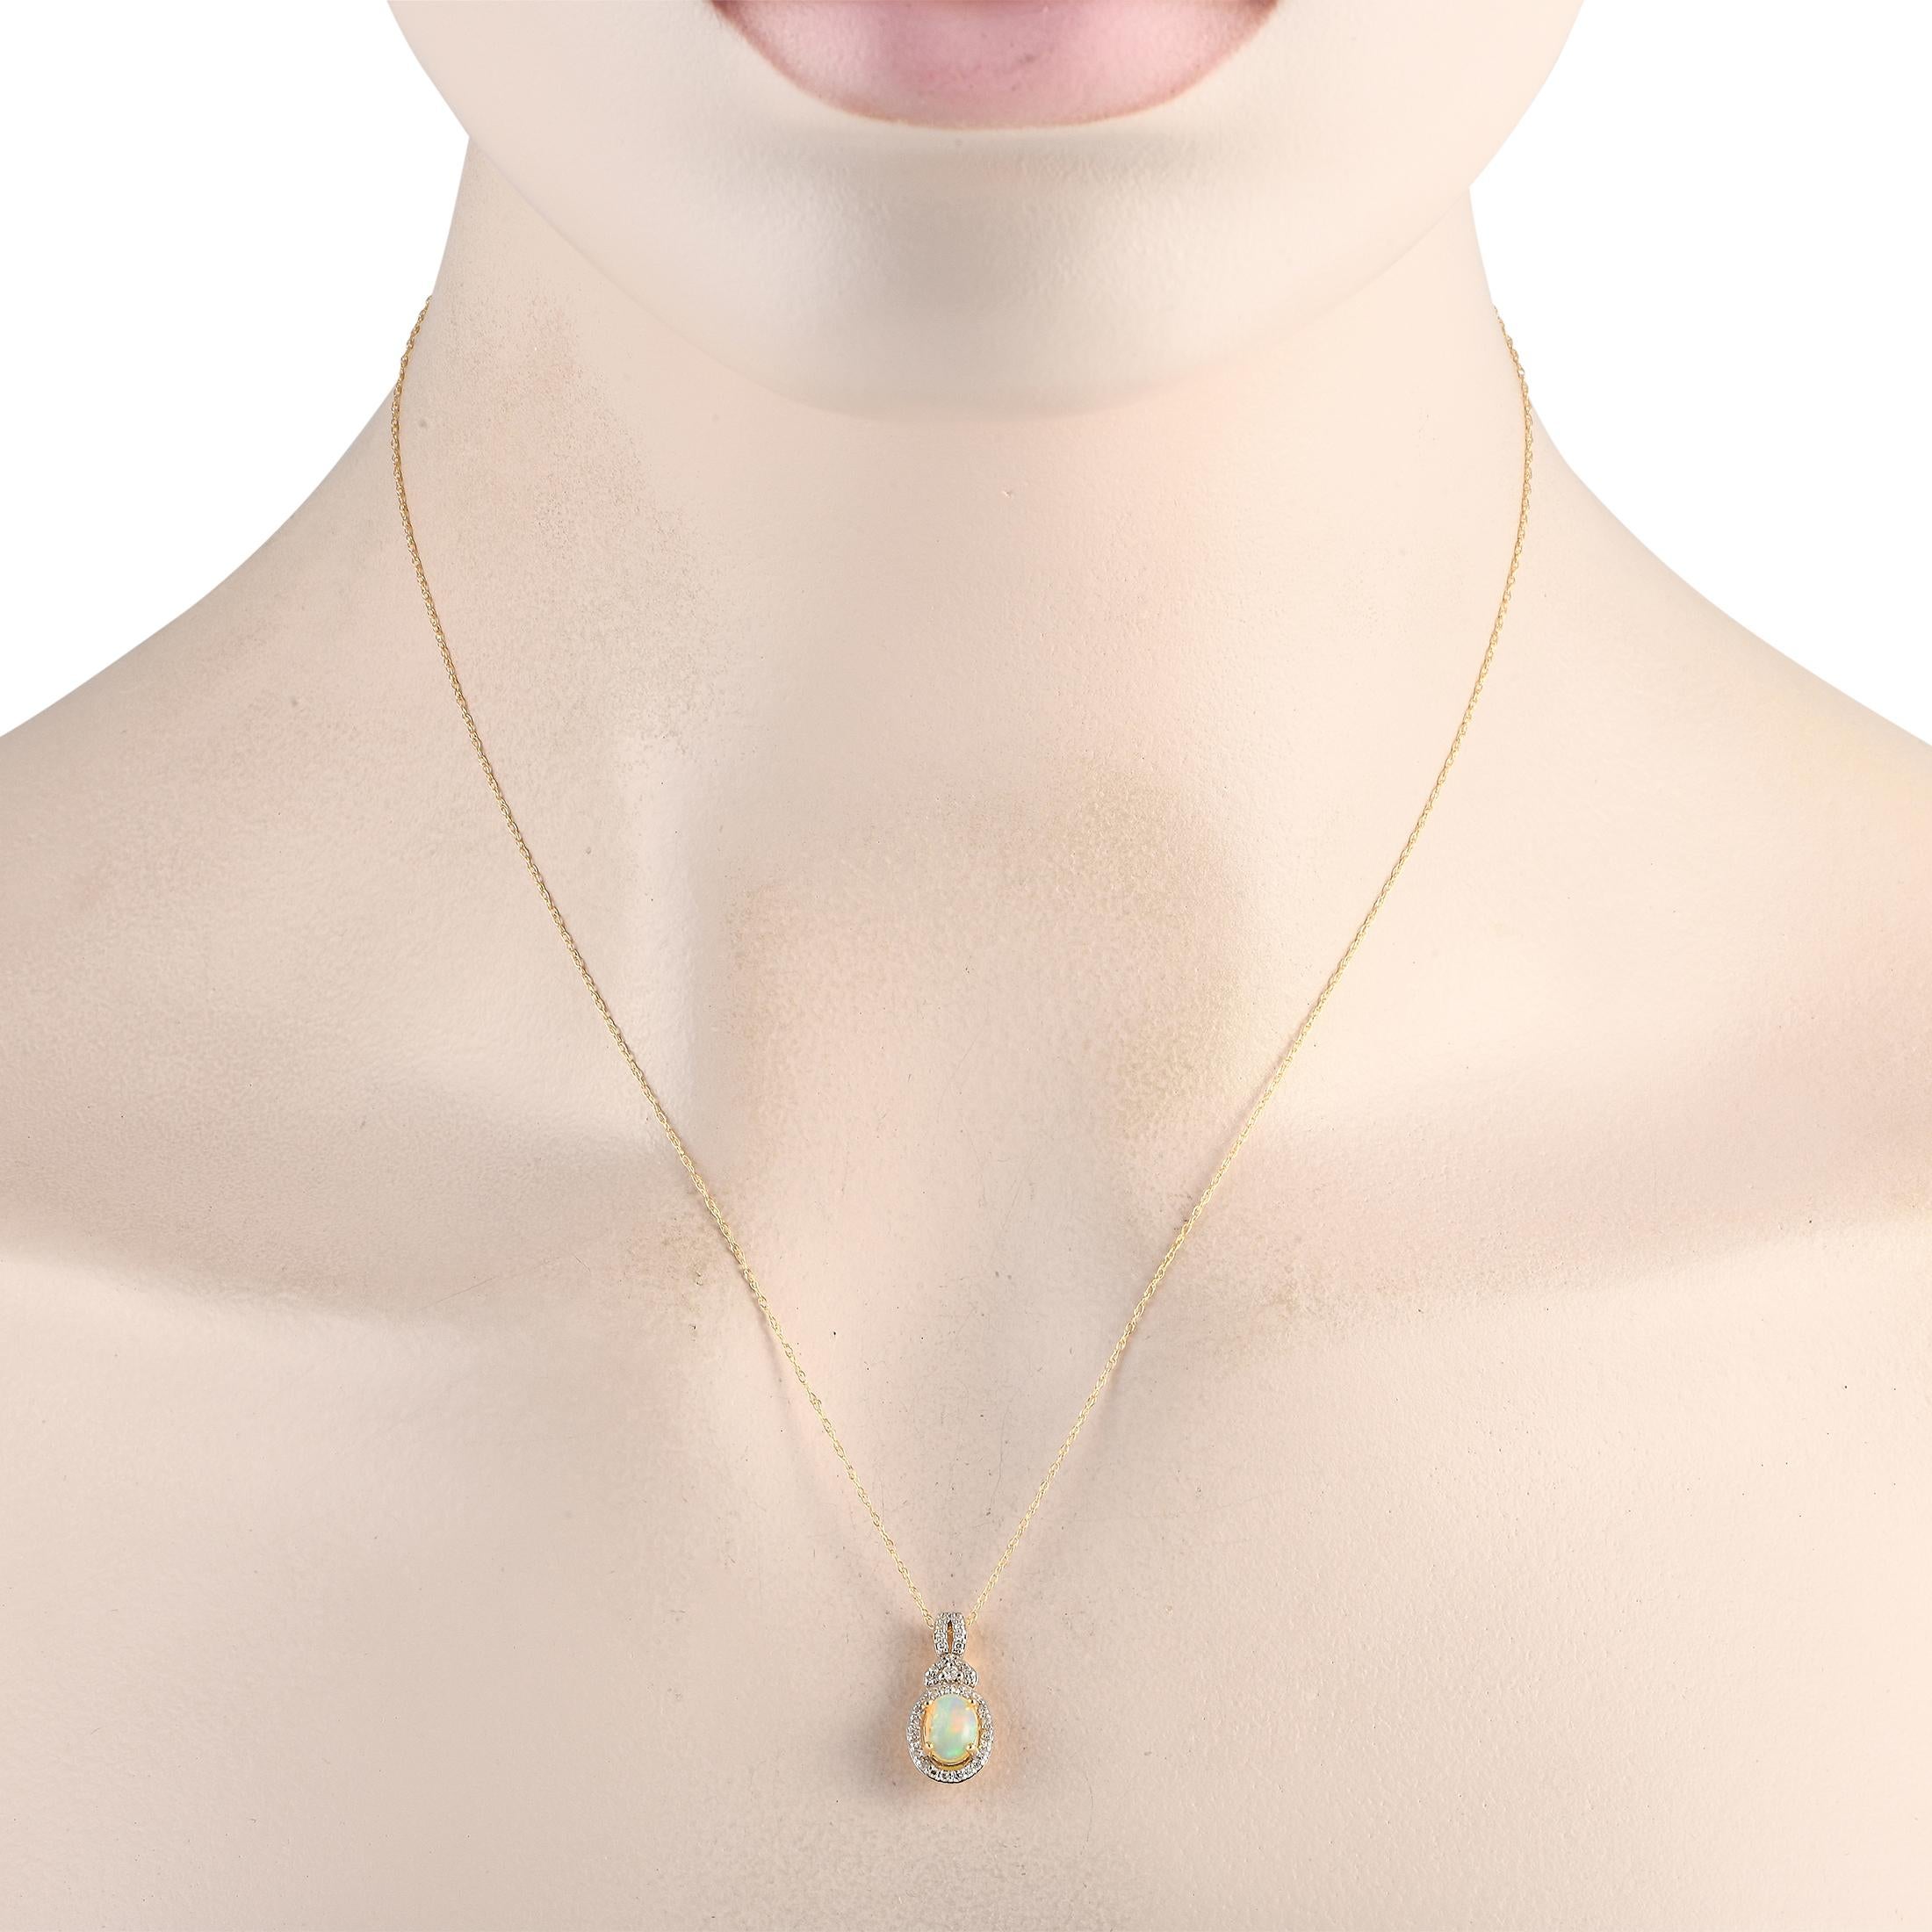 Highlight your necklace and bring a touch of glamour to your looks with this yellow gold necklace punctuated by a milky white opal. The necklace chain measures 18 inches long. It holds a diamond-traced pendant with an oval-shaped opal gemstone